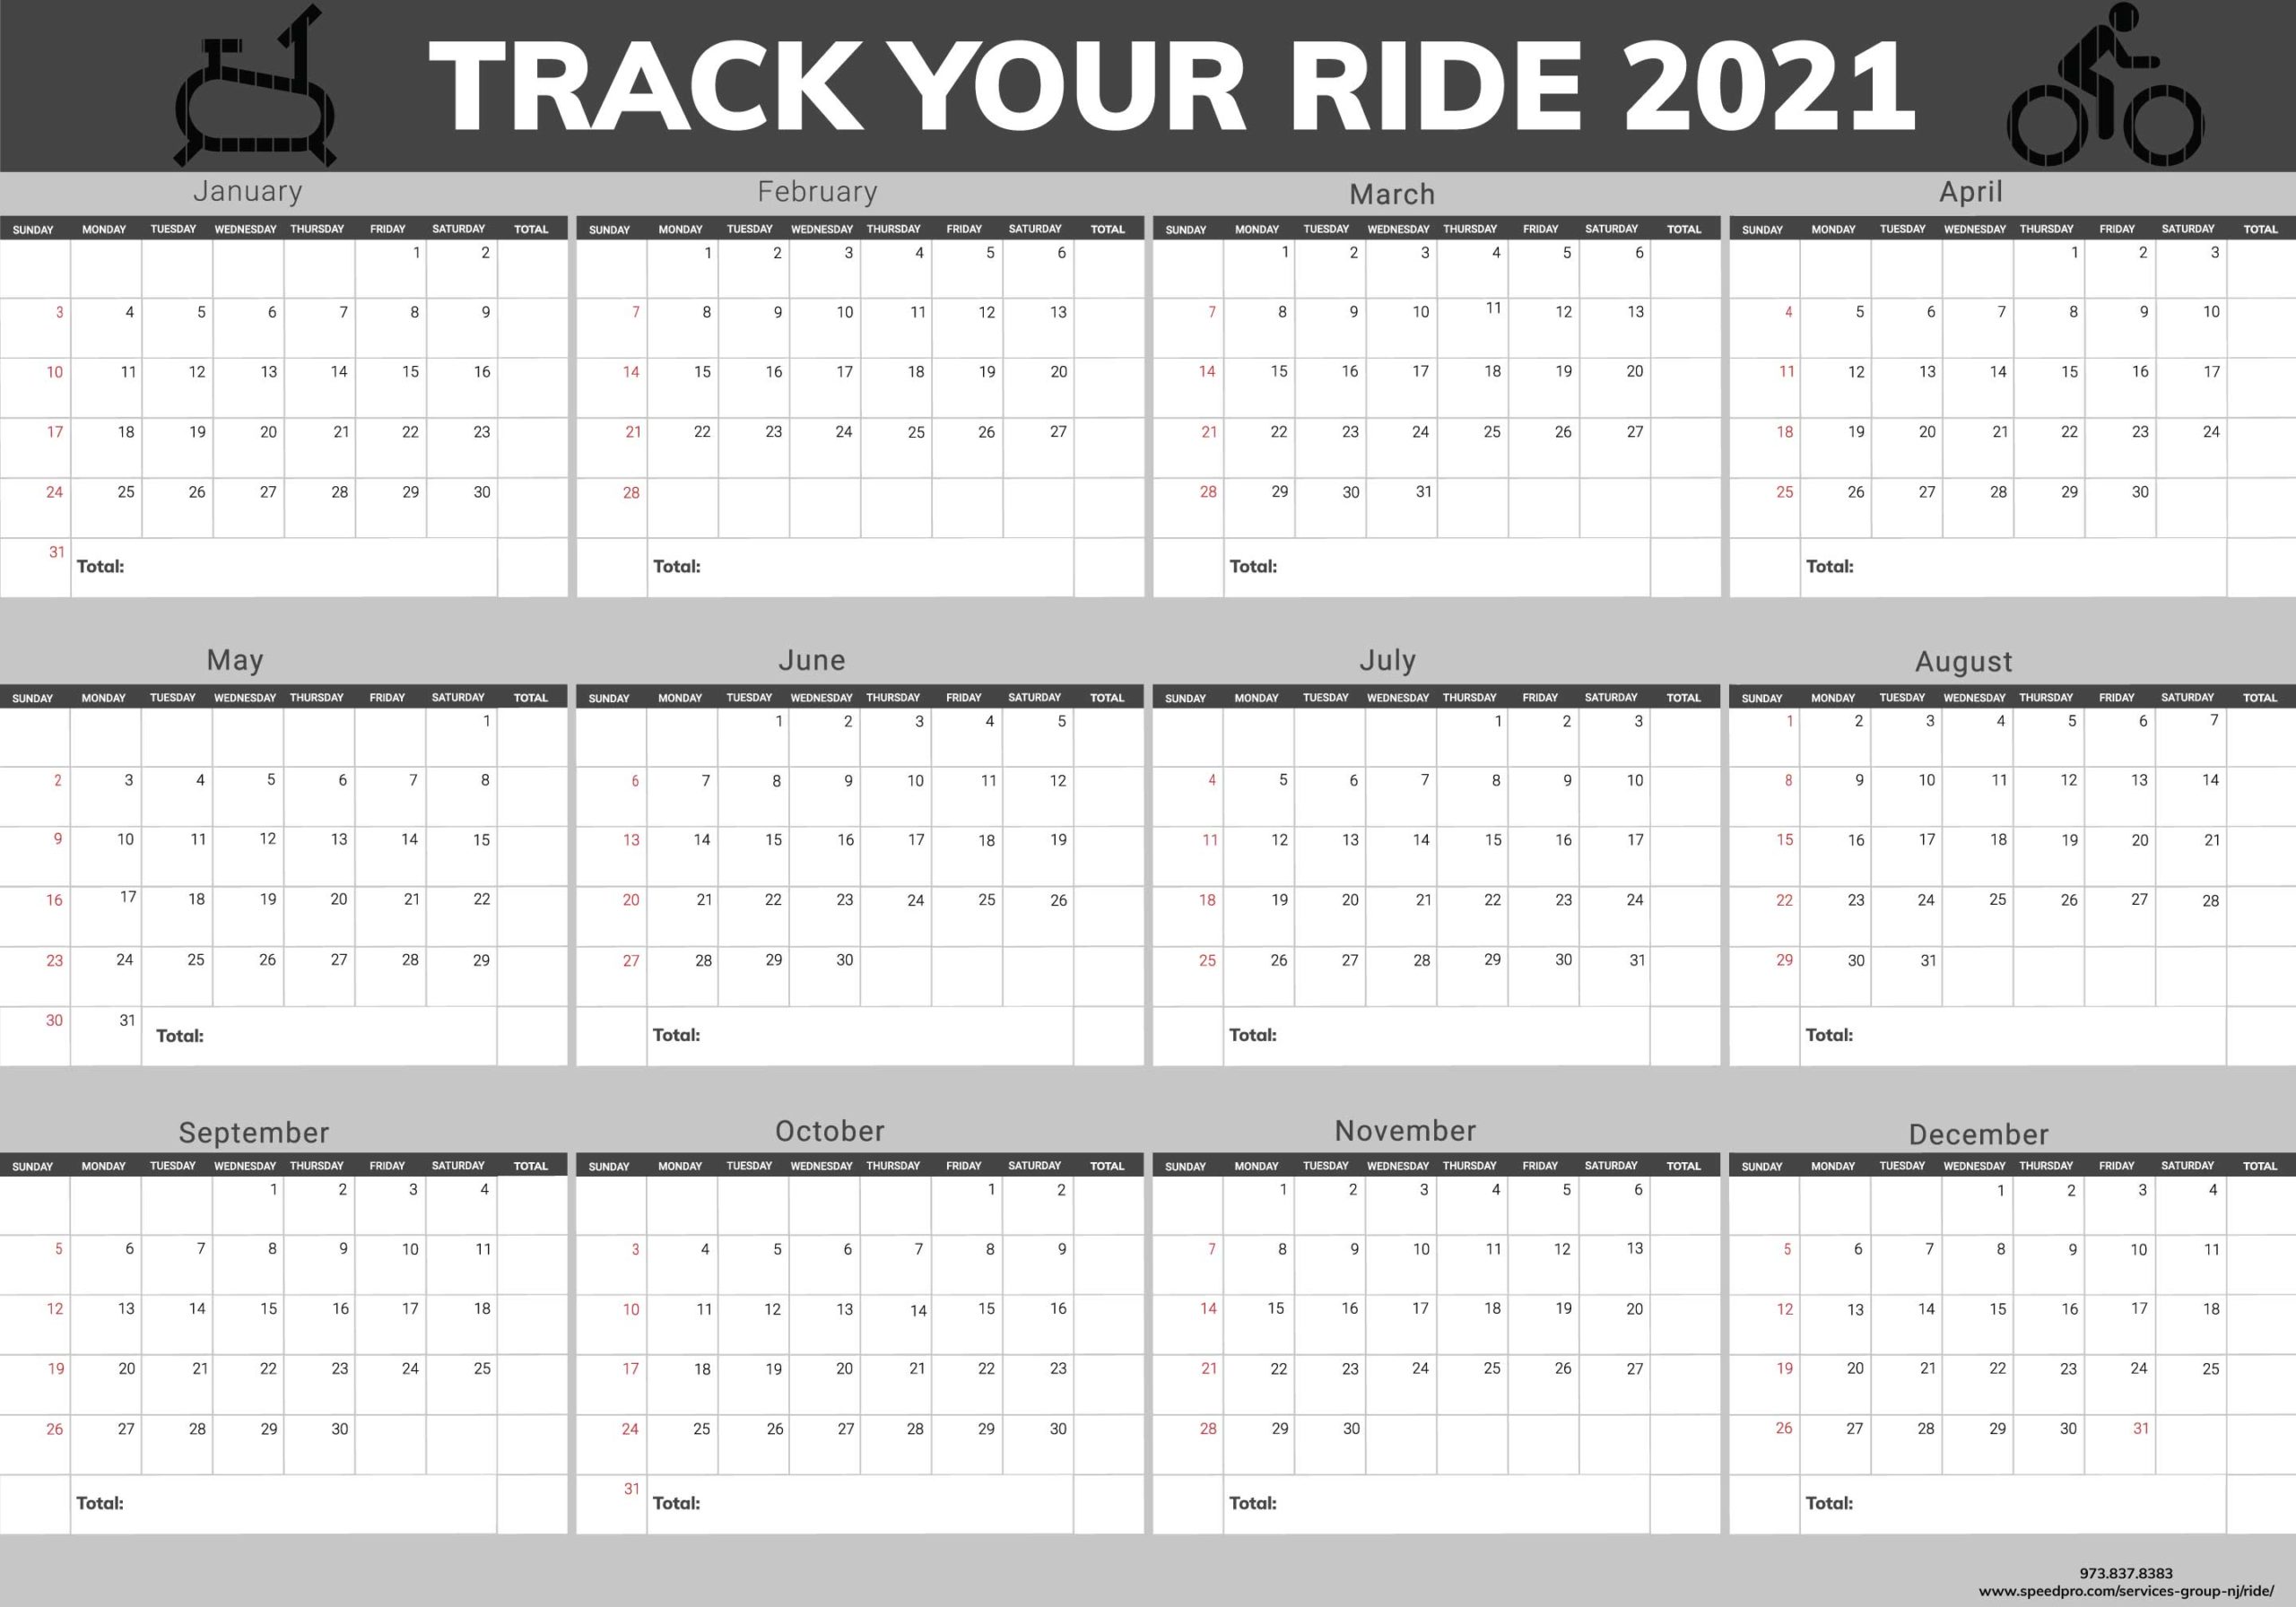 RIDE - Track Your Ride 2021 - Grey